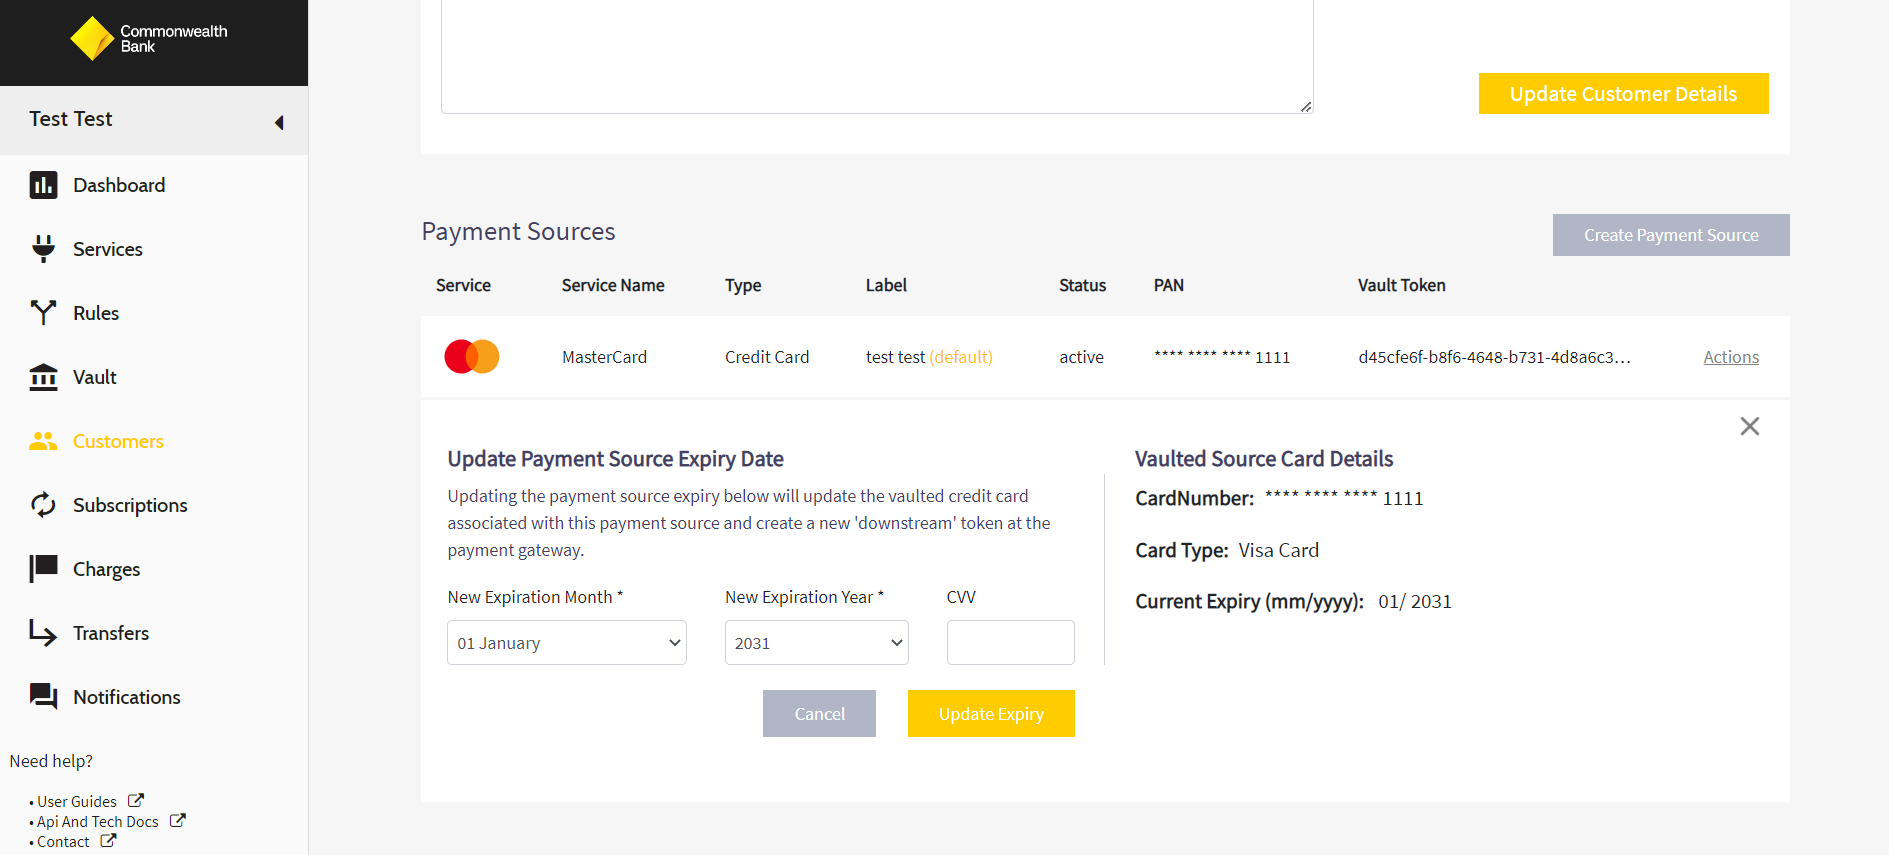 Update payment source expiry date